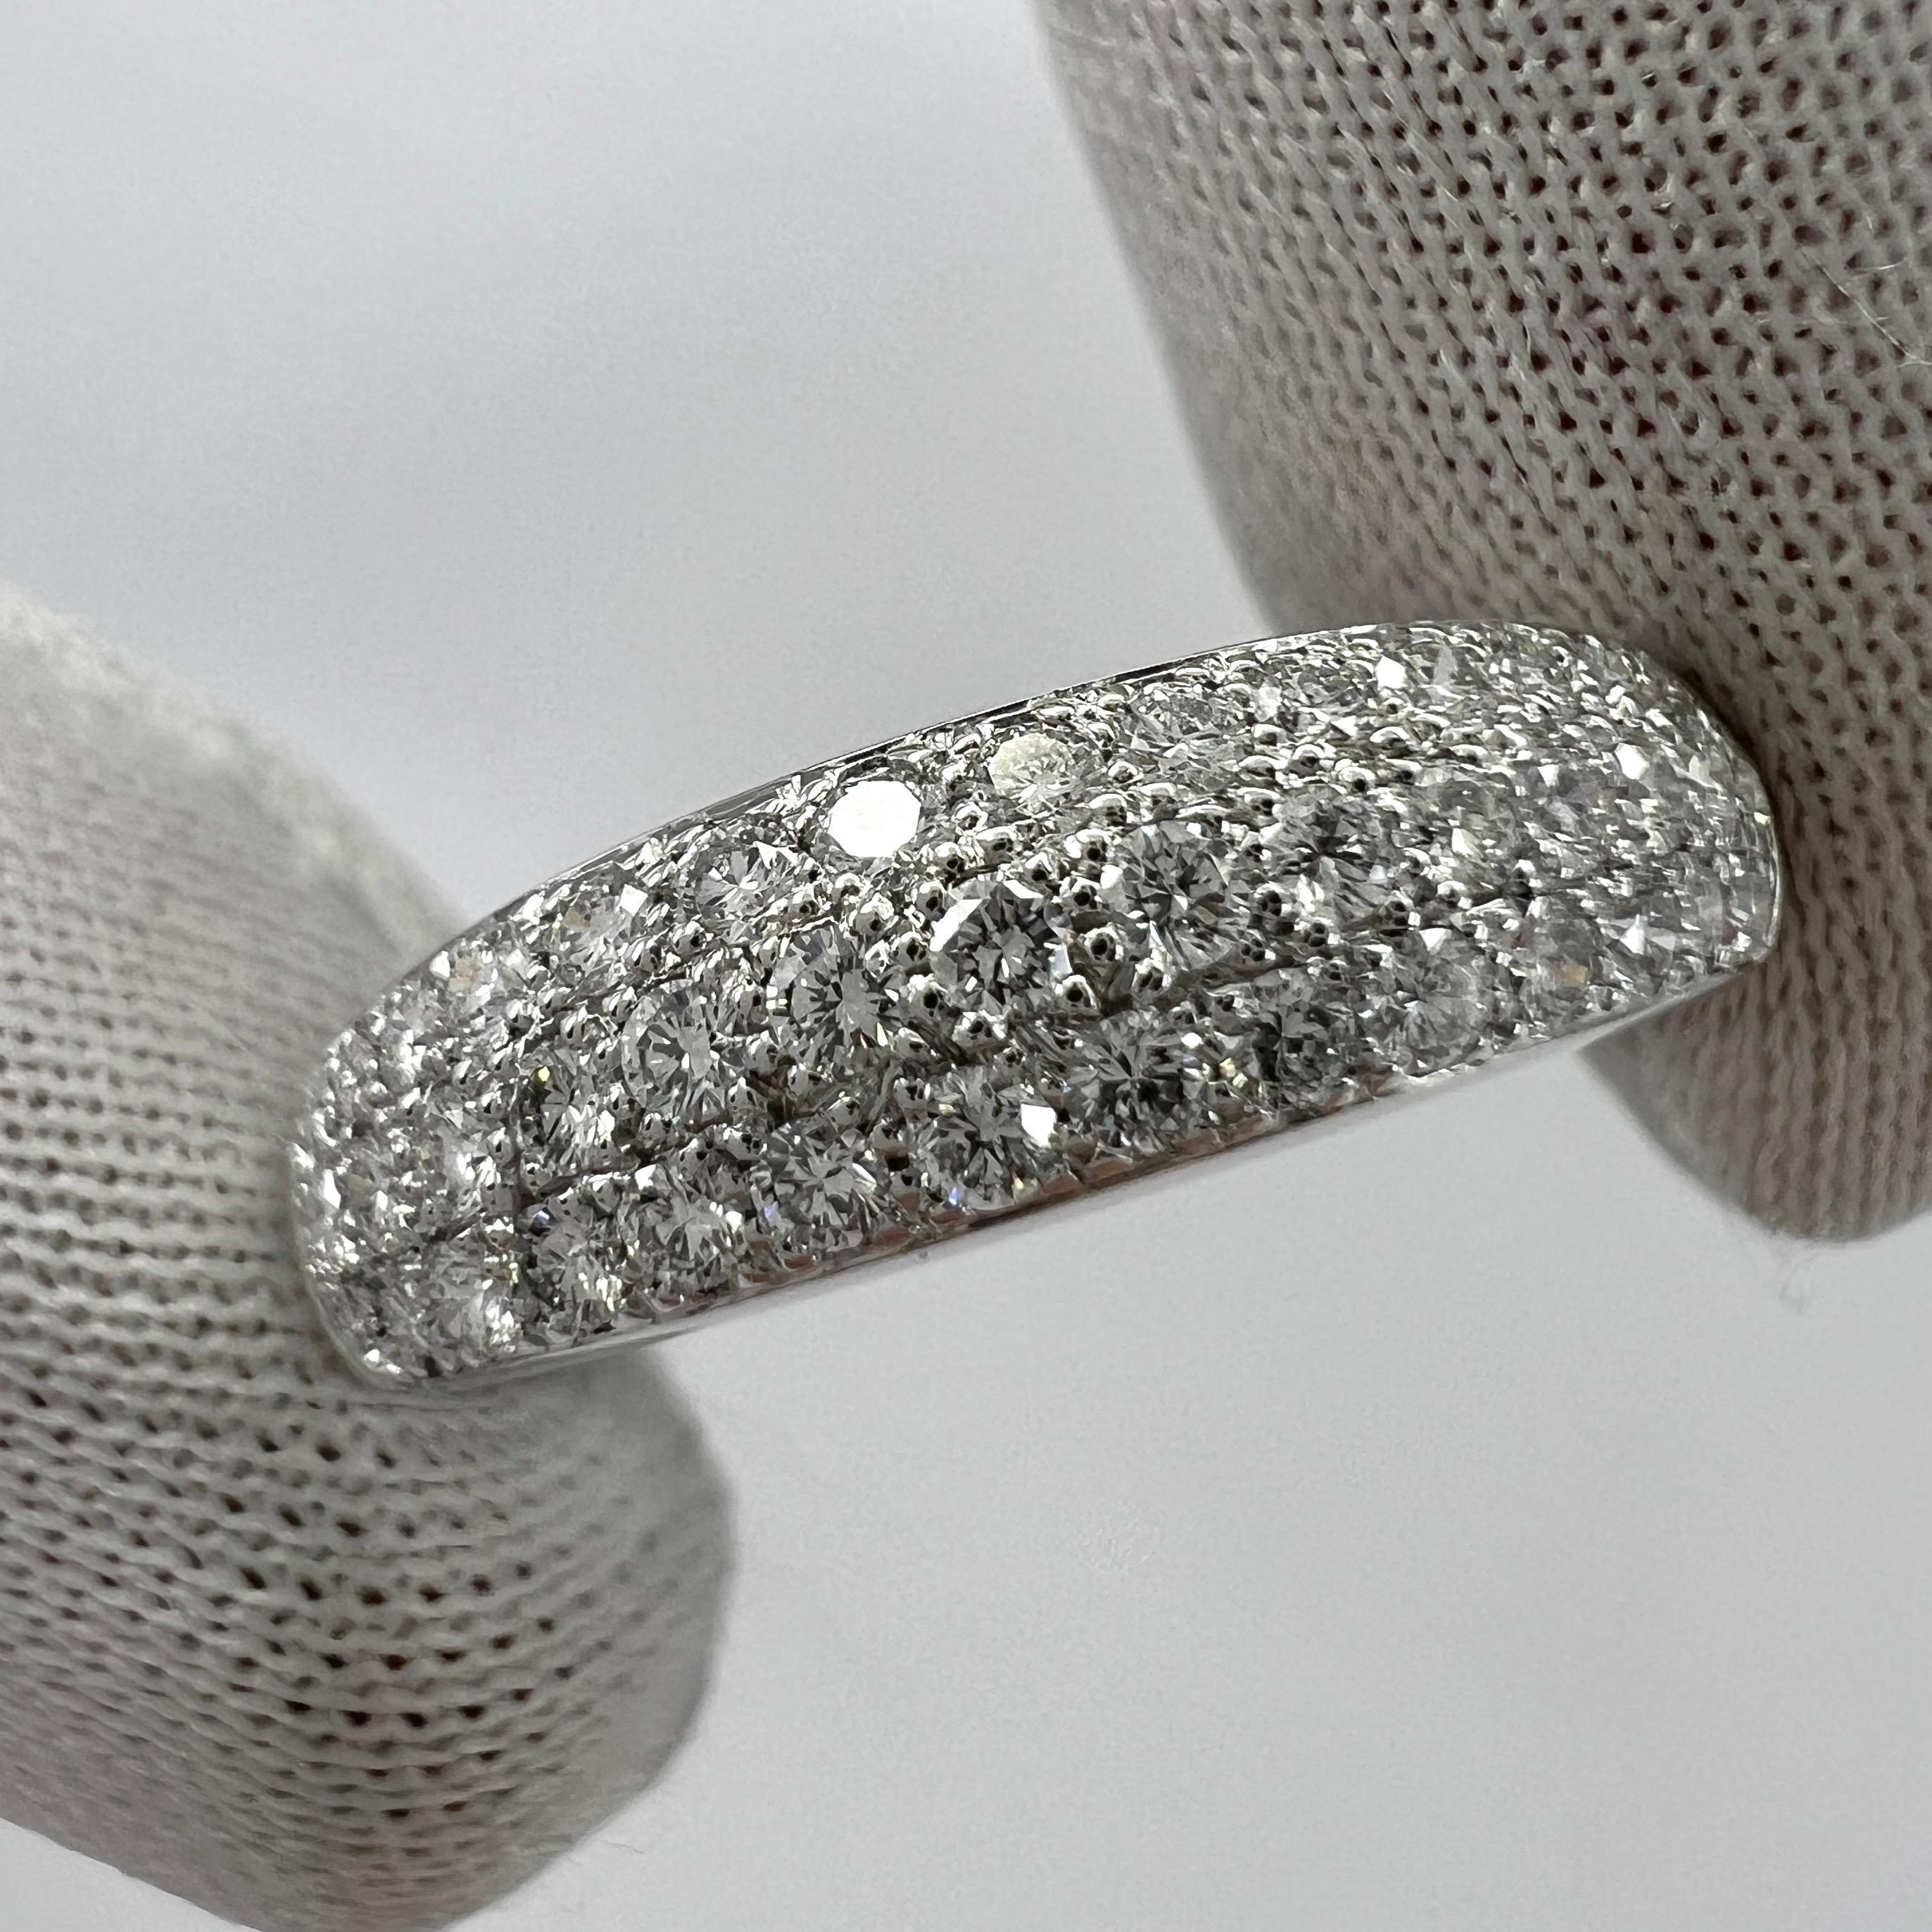 Rare Vintage Van Cleef & Arpels Pavé Diamond 18k White Gold Band Ring.

This beautifully made ring by VCA features a curved dome design with three rows of beautifully set Pavé diamonds extending halfway around the band.

The diamonds are of